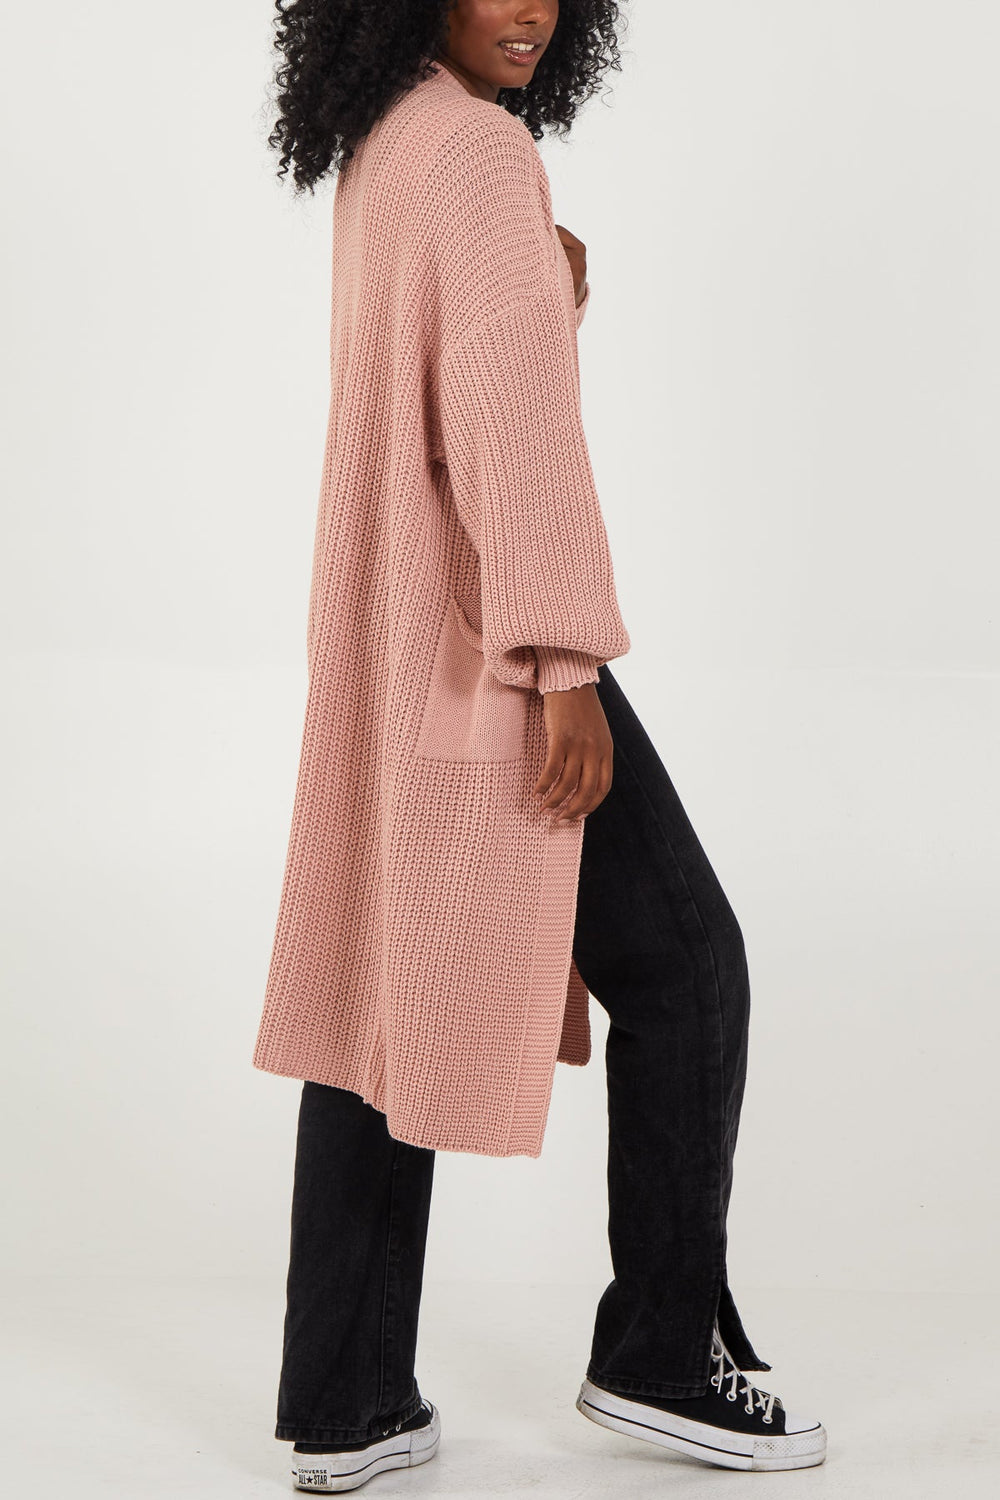 The Knitted Long Cardigan Edge to Edge